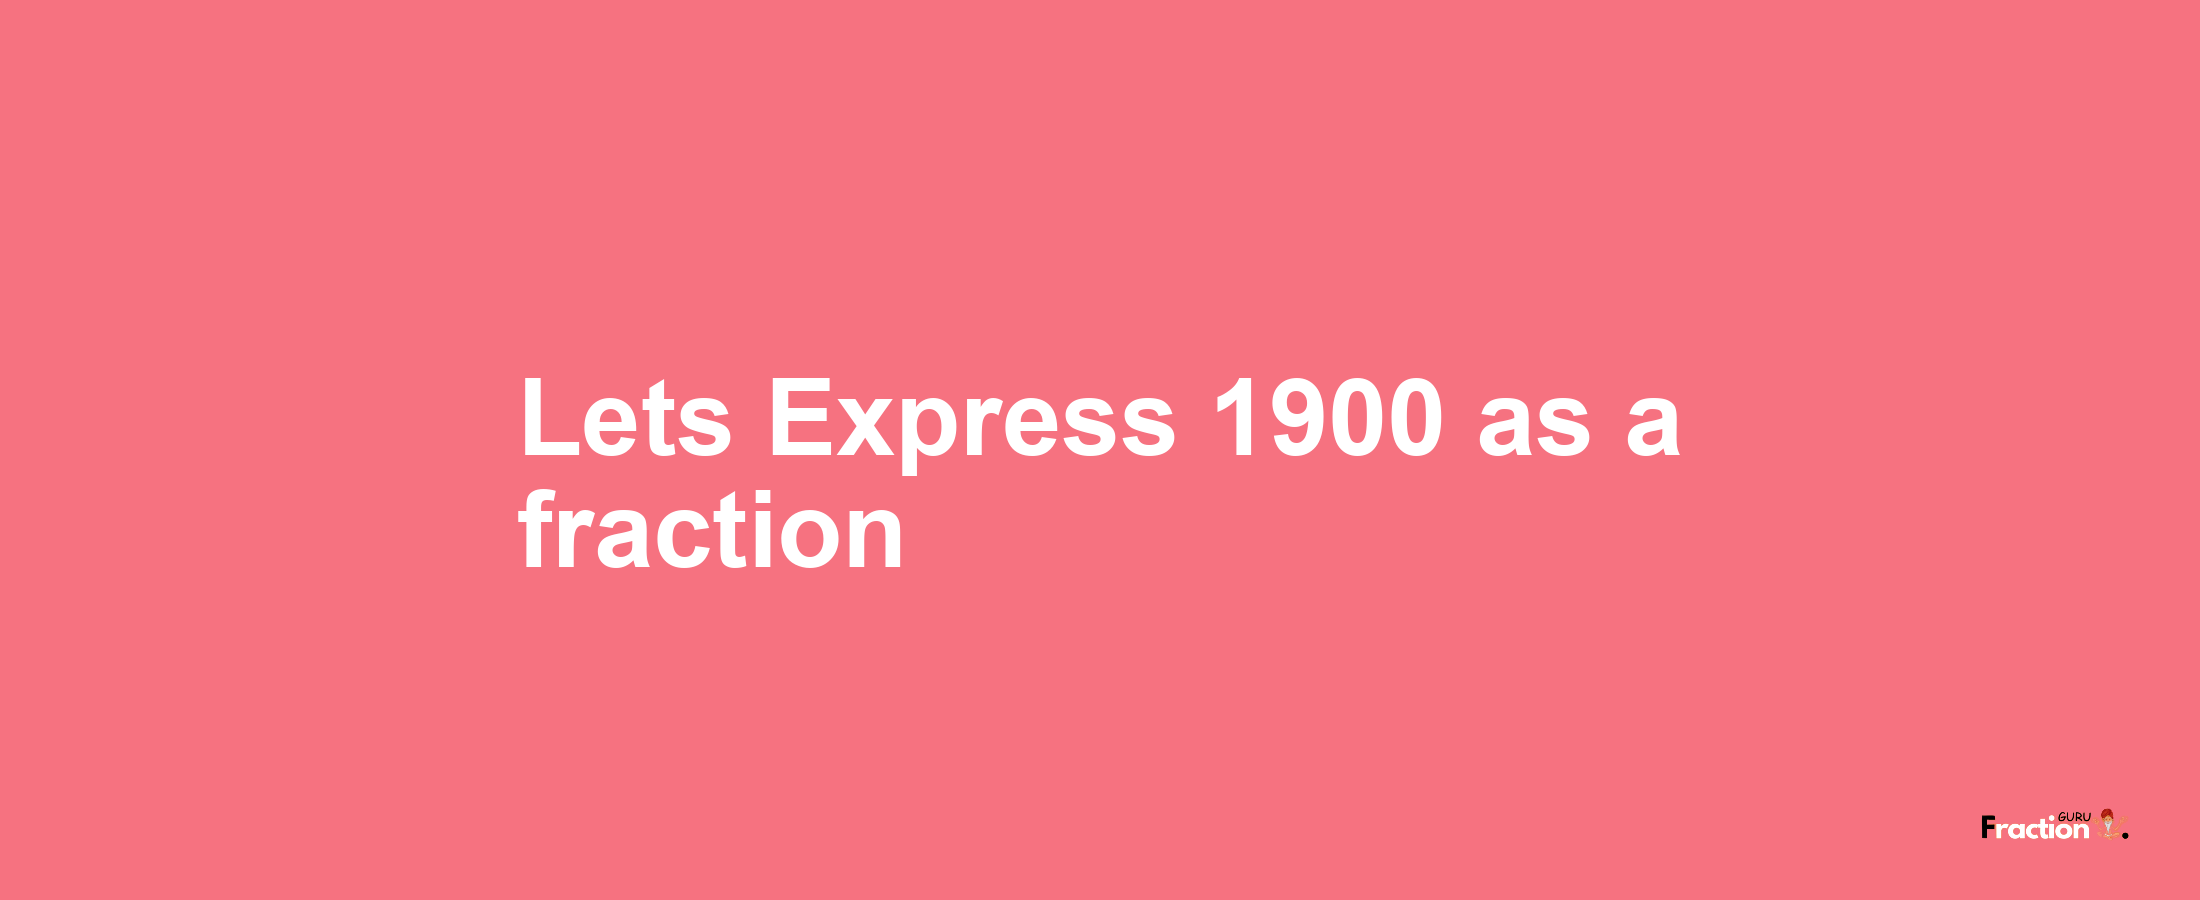 Lets Express 1900 as afraction